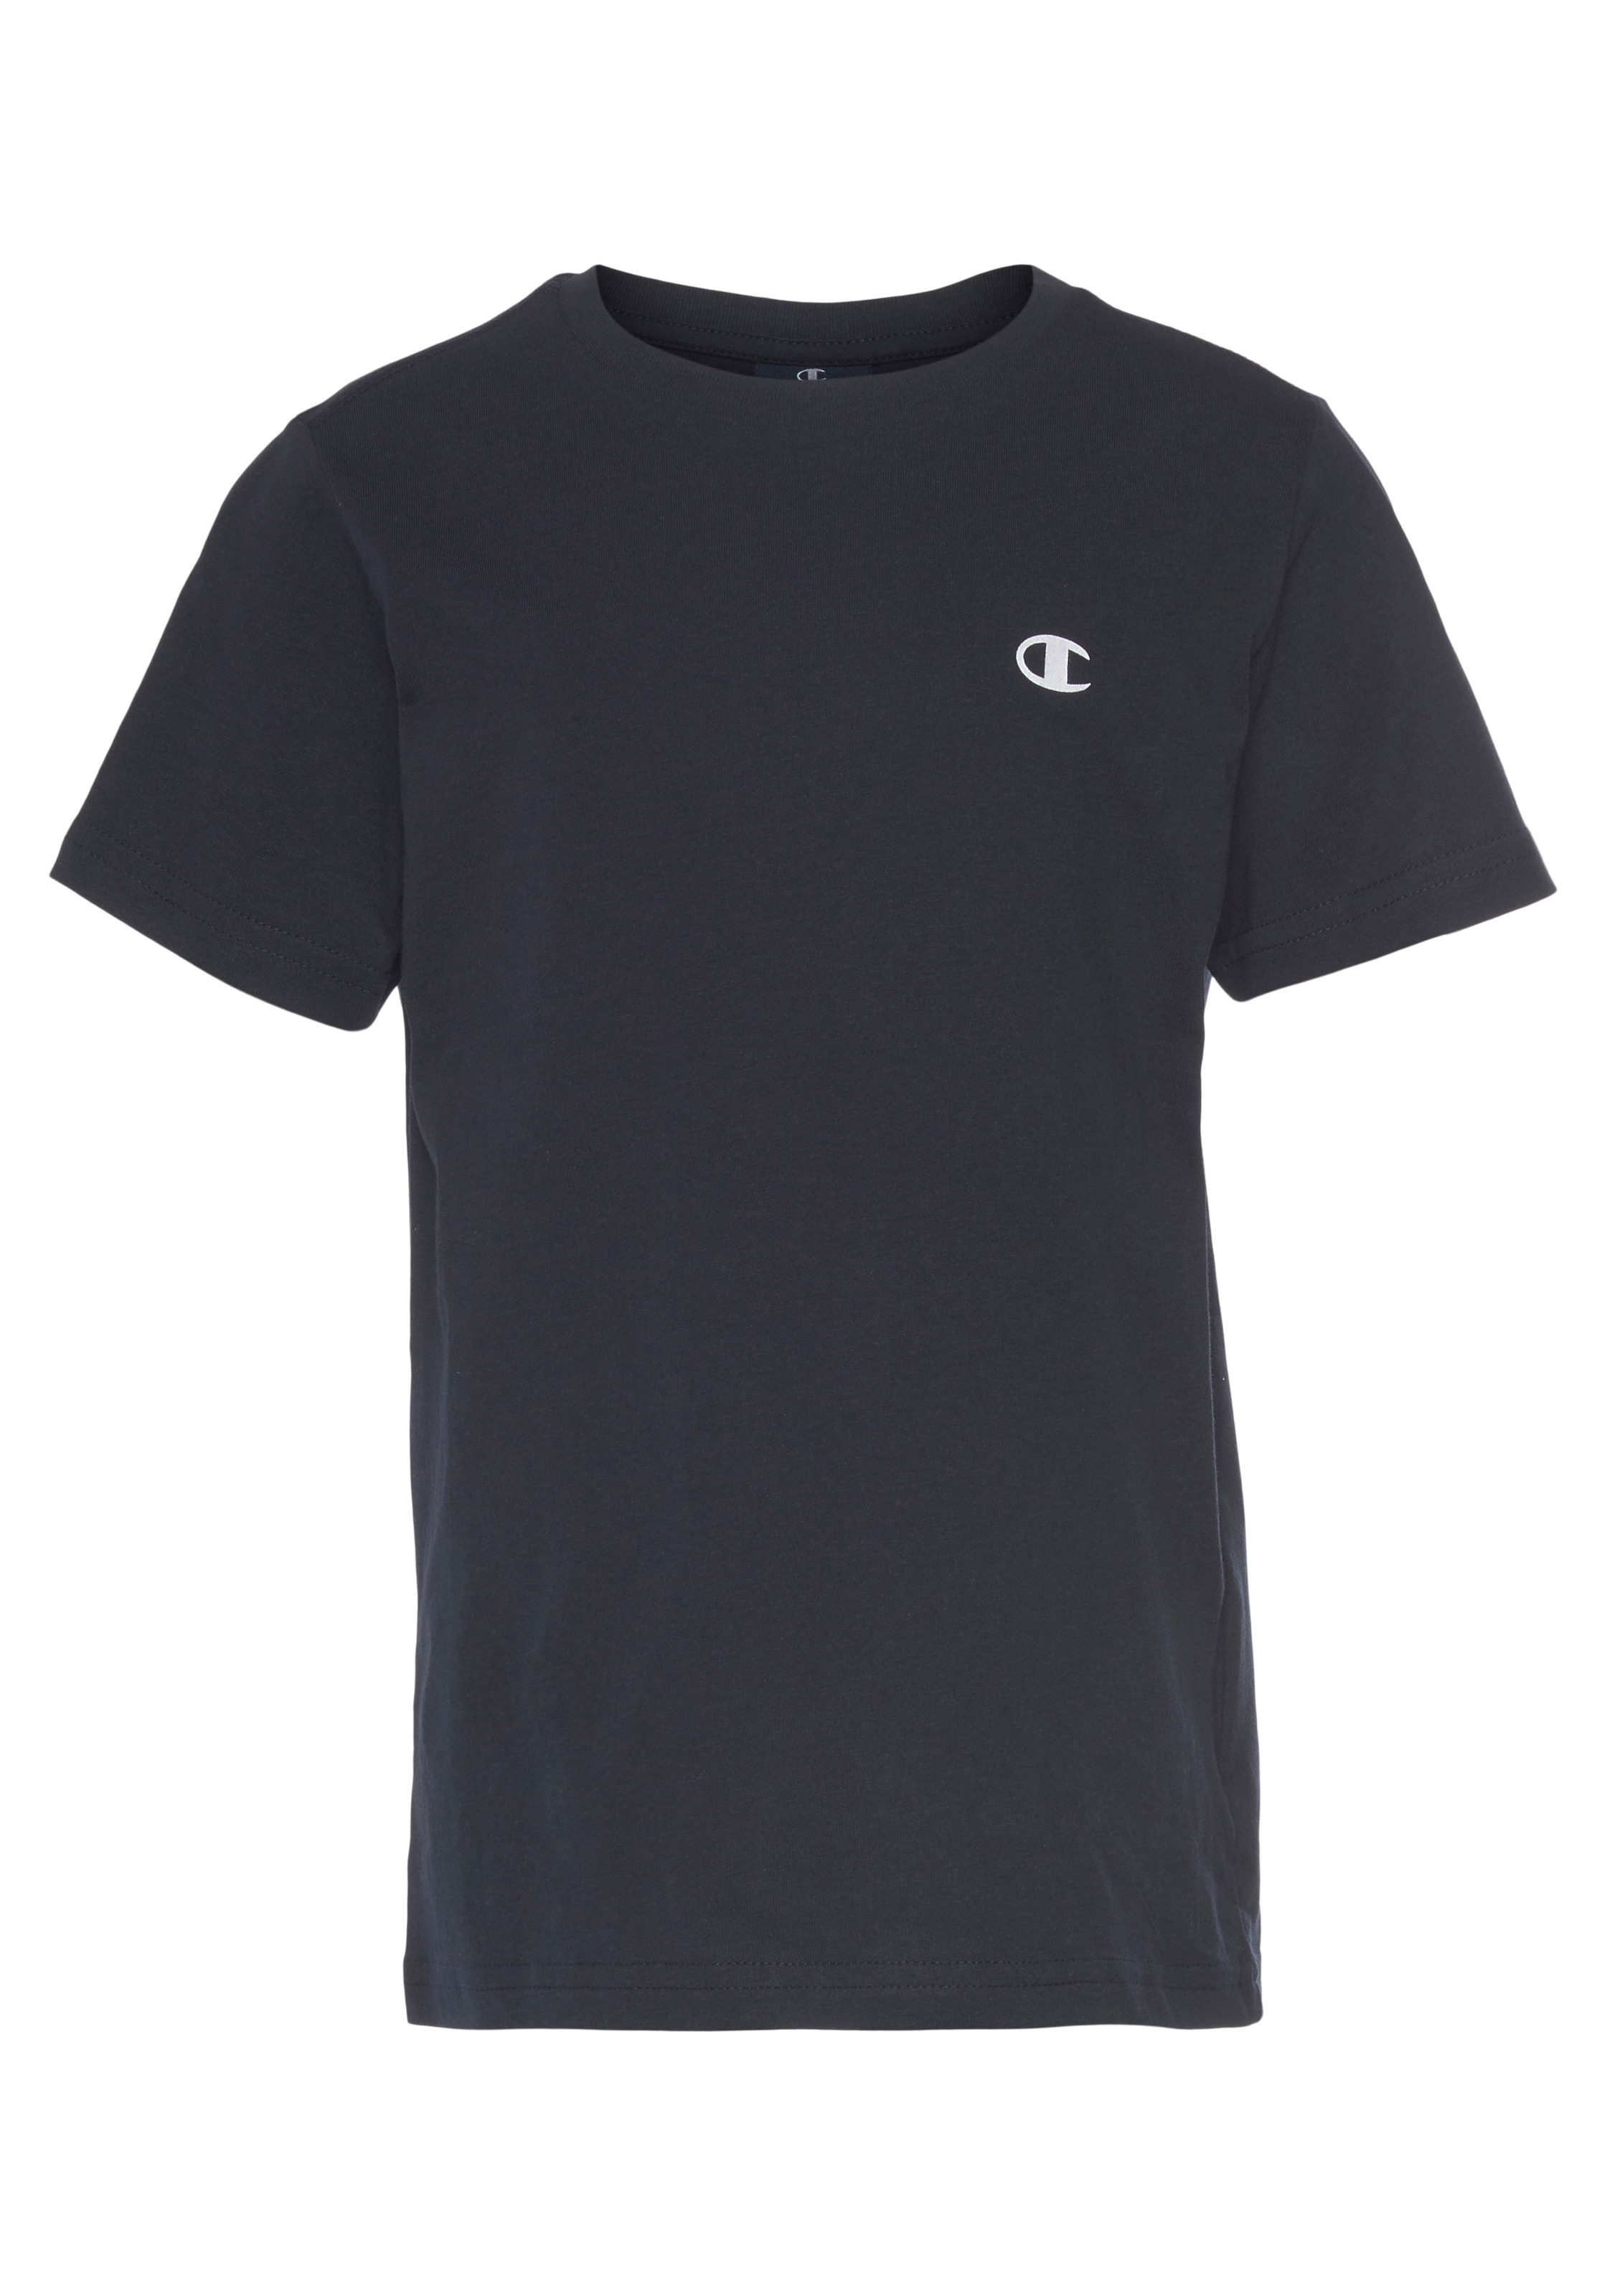 Champion T-Shirt bei 2 CREW OTTO NECK«, (Packung, tlg.) »2-PCK